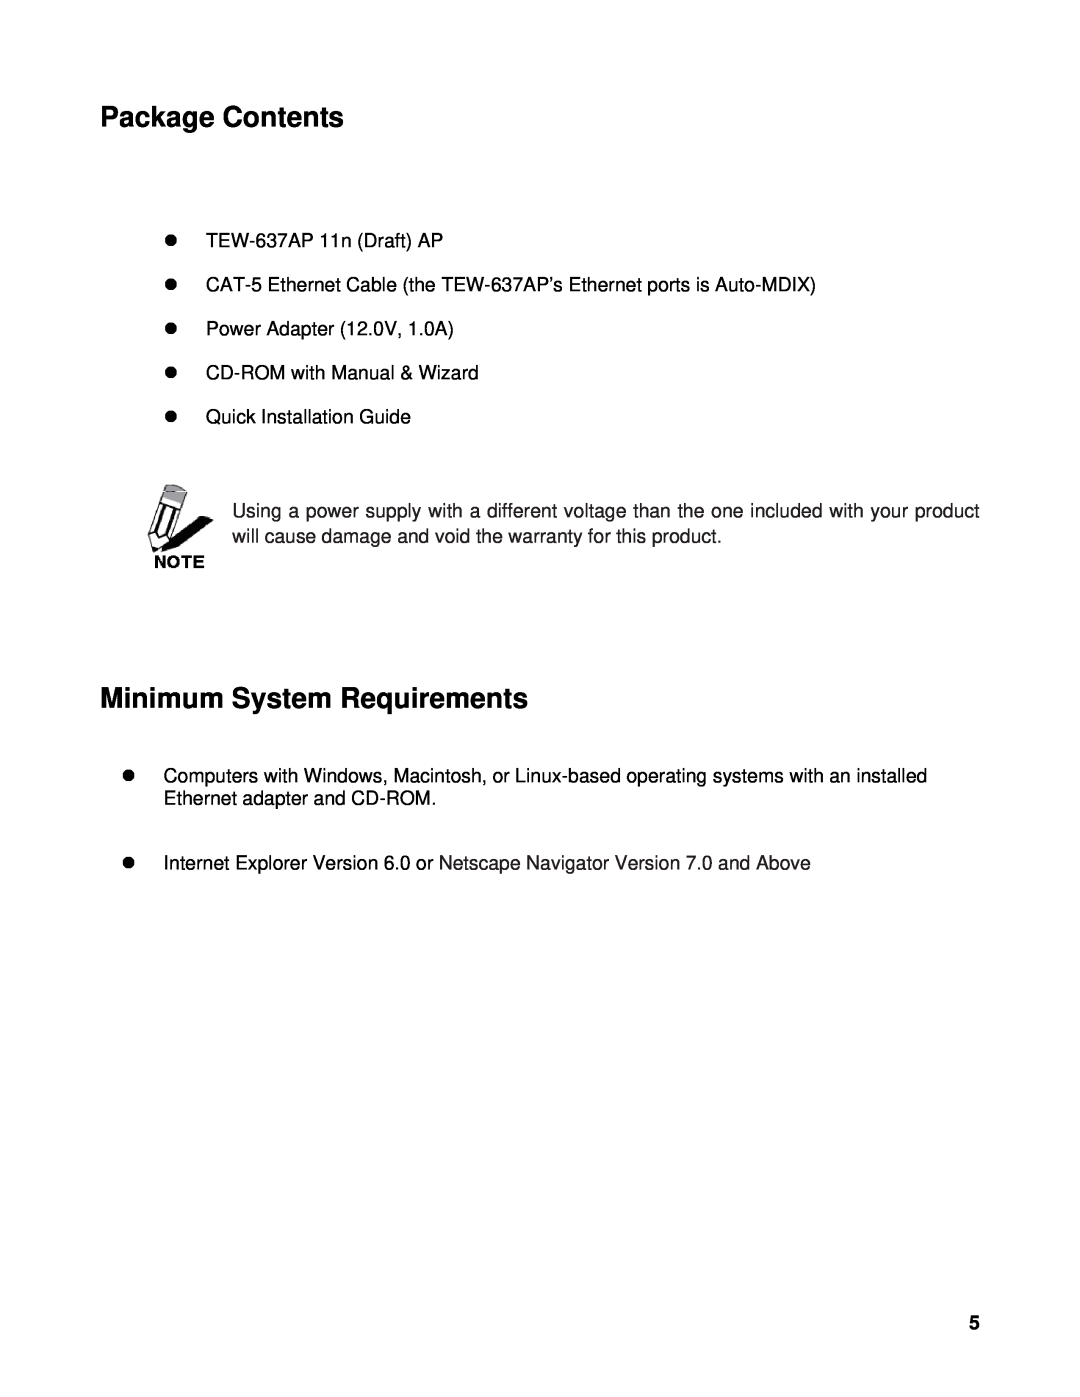 TRENDnet TEW-637AP manual Package Contents, Minimum System Requirements 